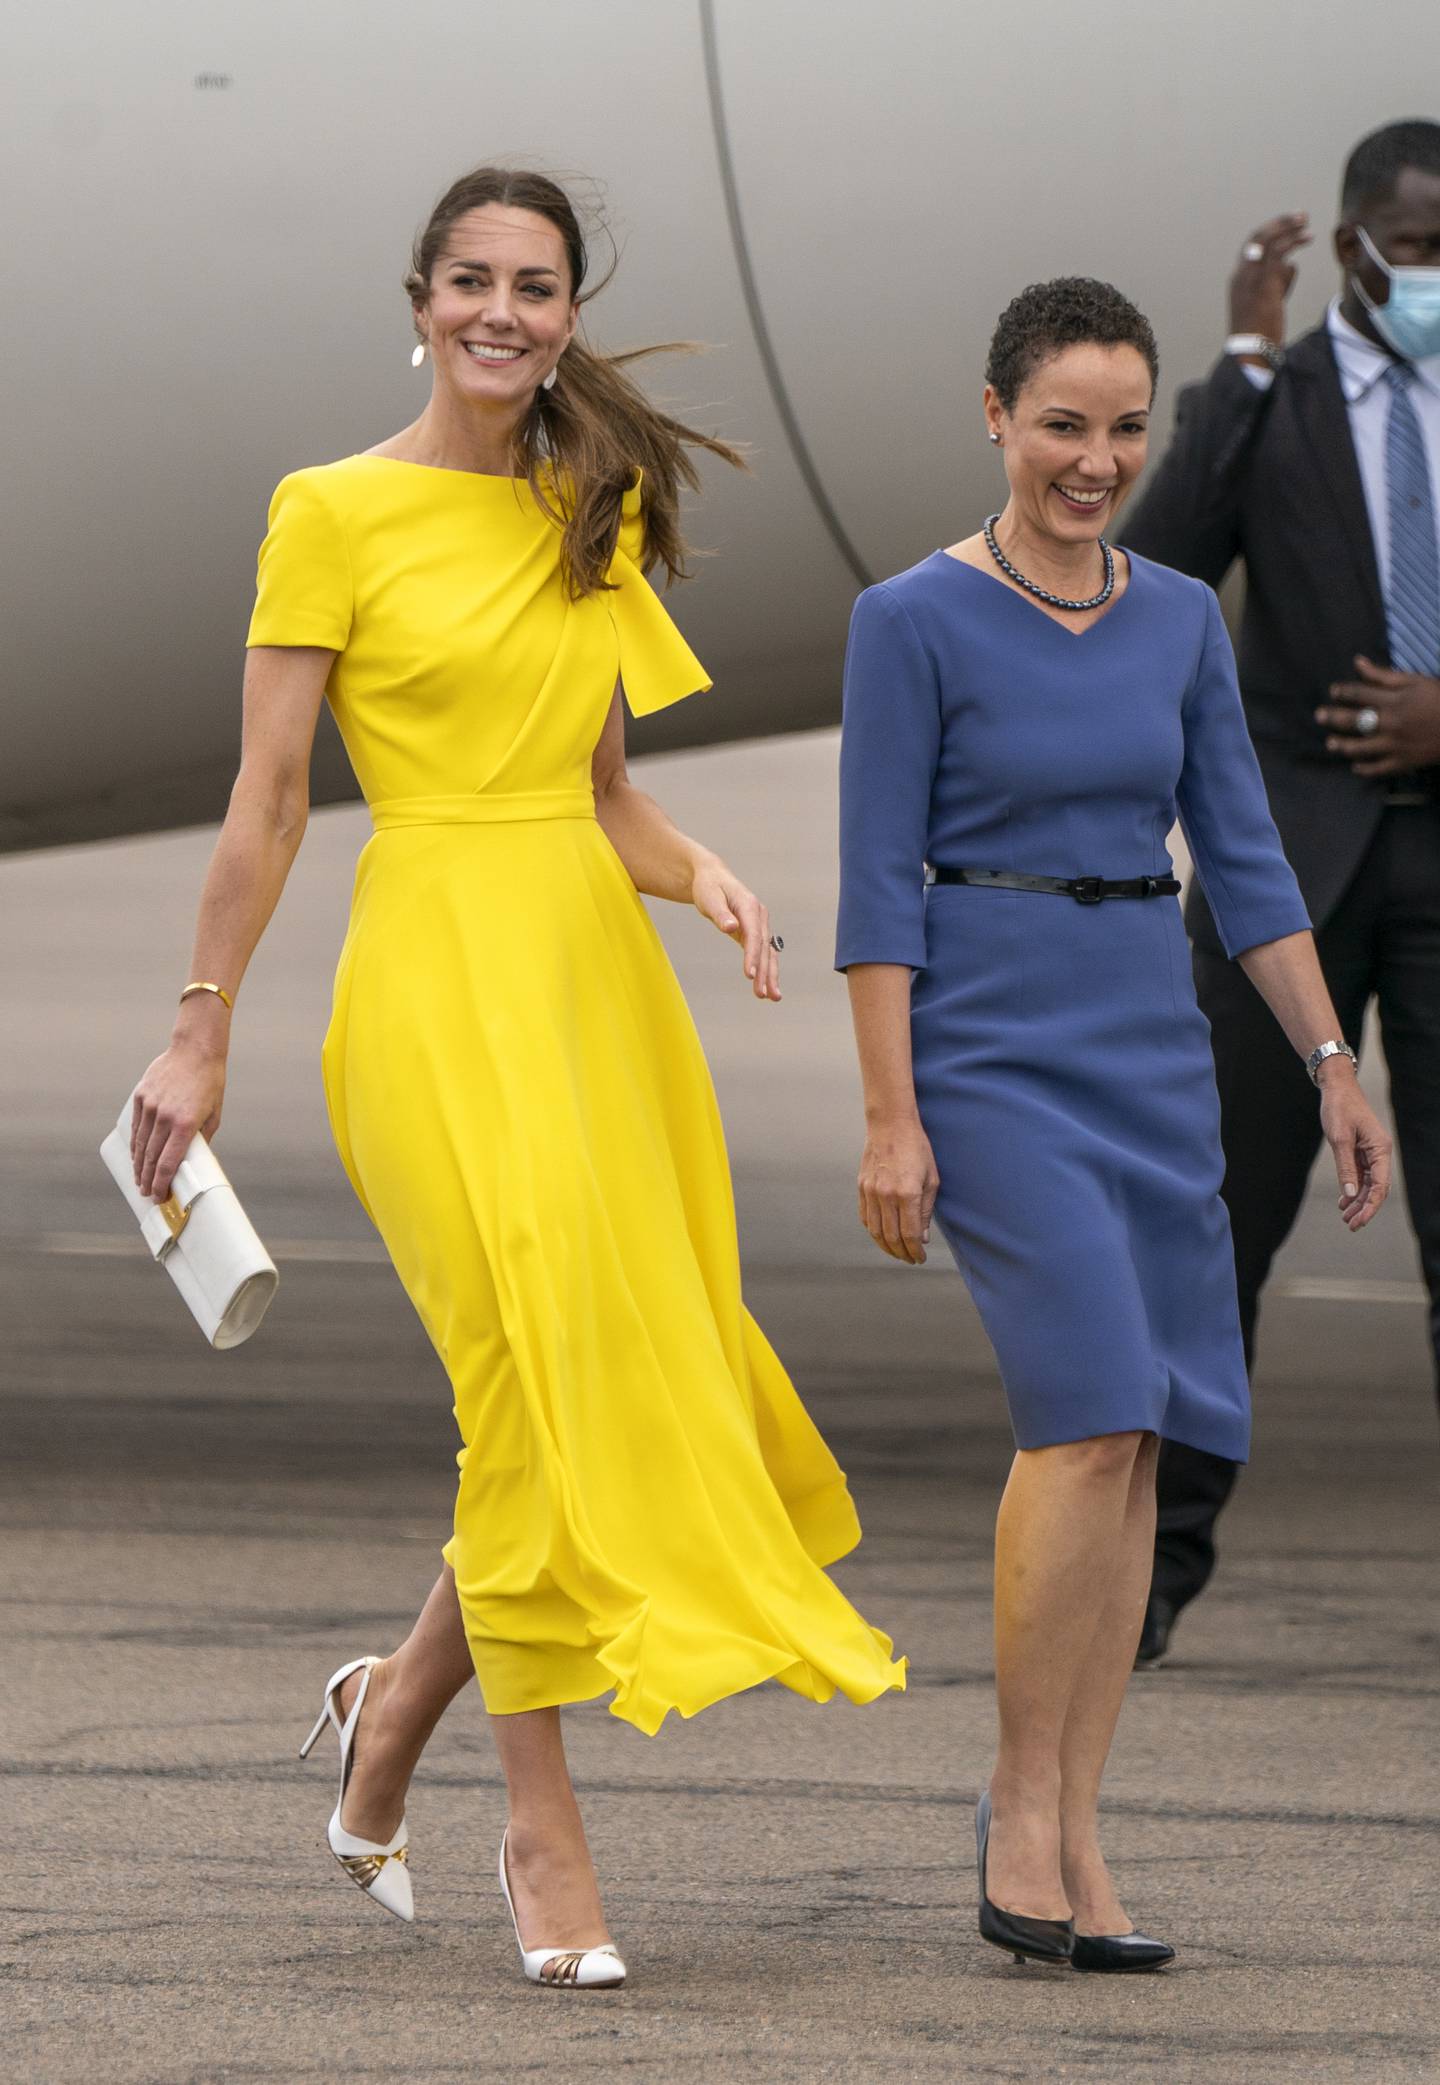 The Duchess of Cambridge with Jamaica's Minister of Foreign Affairs and Foreign Trade Kamina Johnson-Smith at Norman Manley International Airport in Kingston, Jamaica, on March 22, 2022.